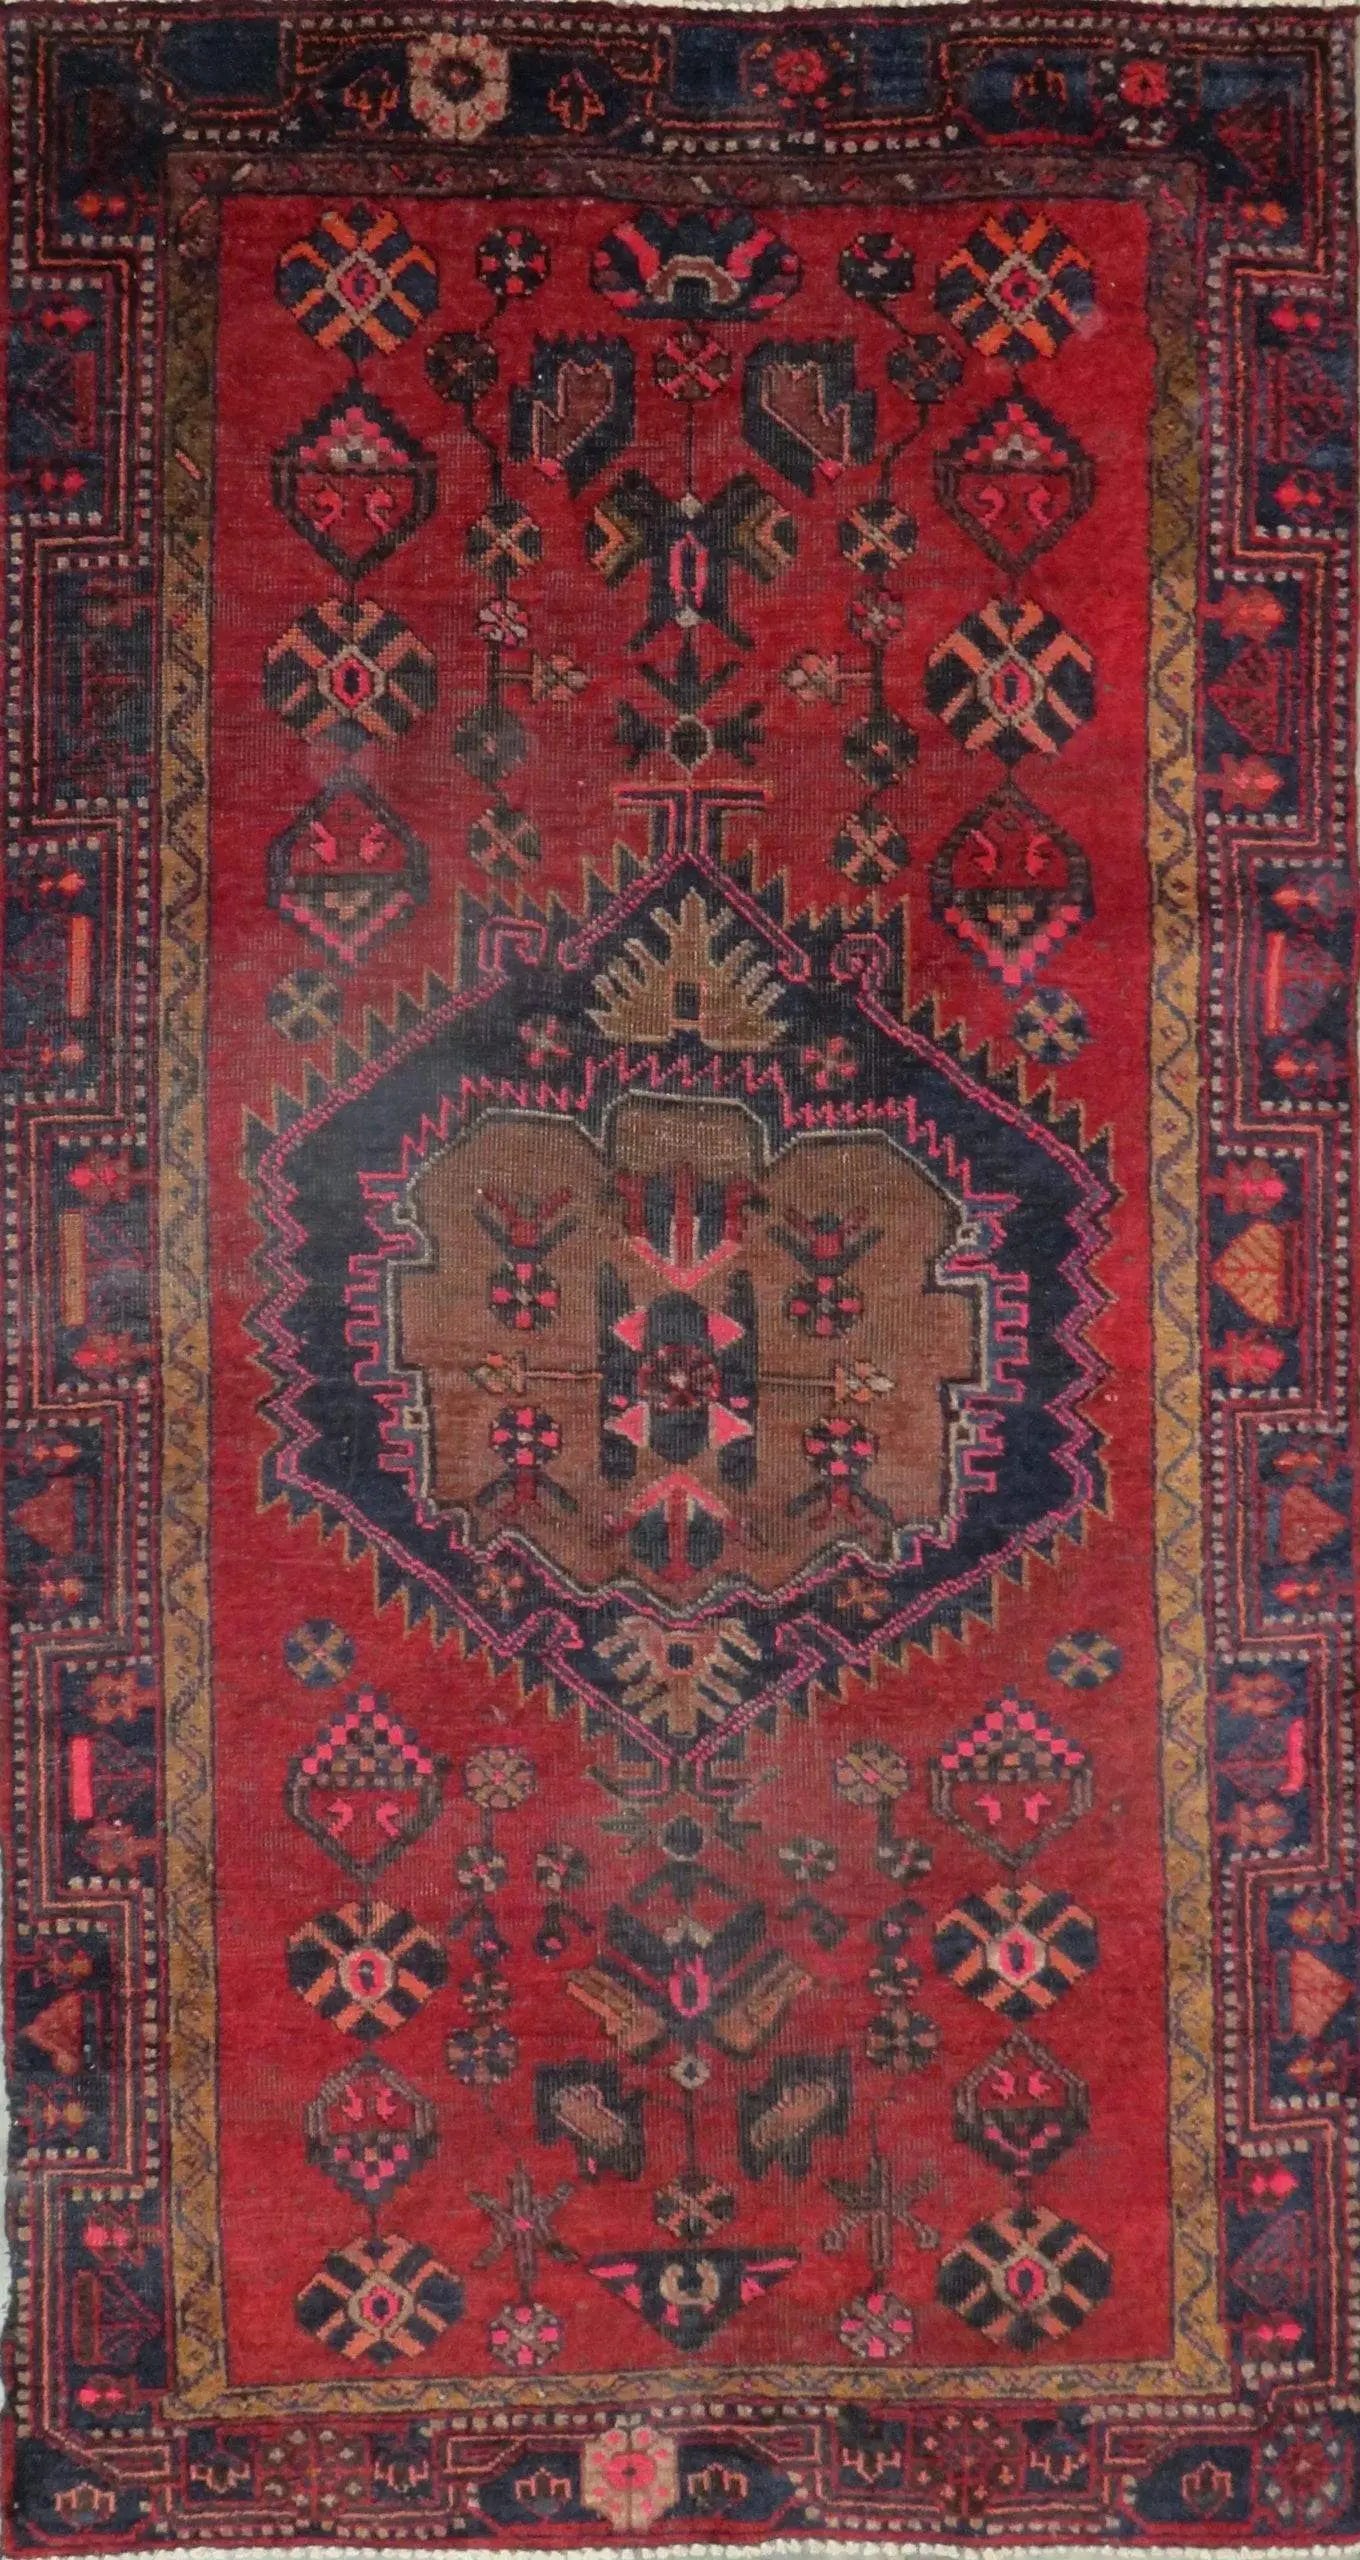 Hand-Knotted Persian Wool Rug _ Luxurious Vintage Design, 7'8" x 4'0", Artisan Crafted